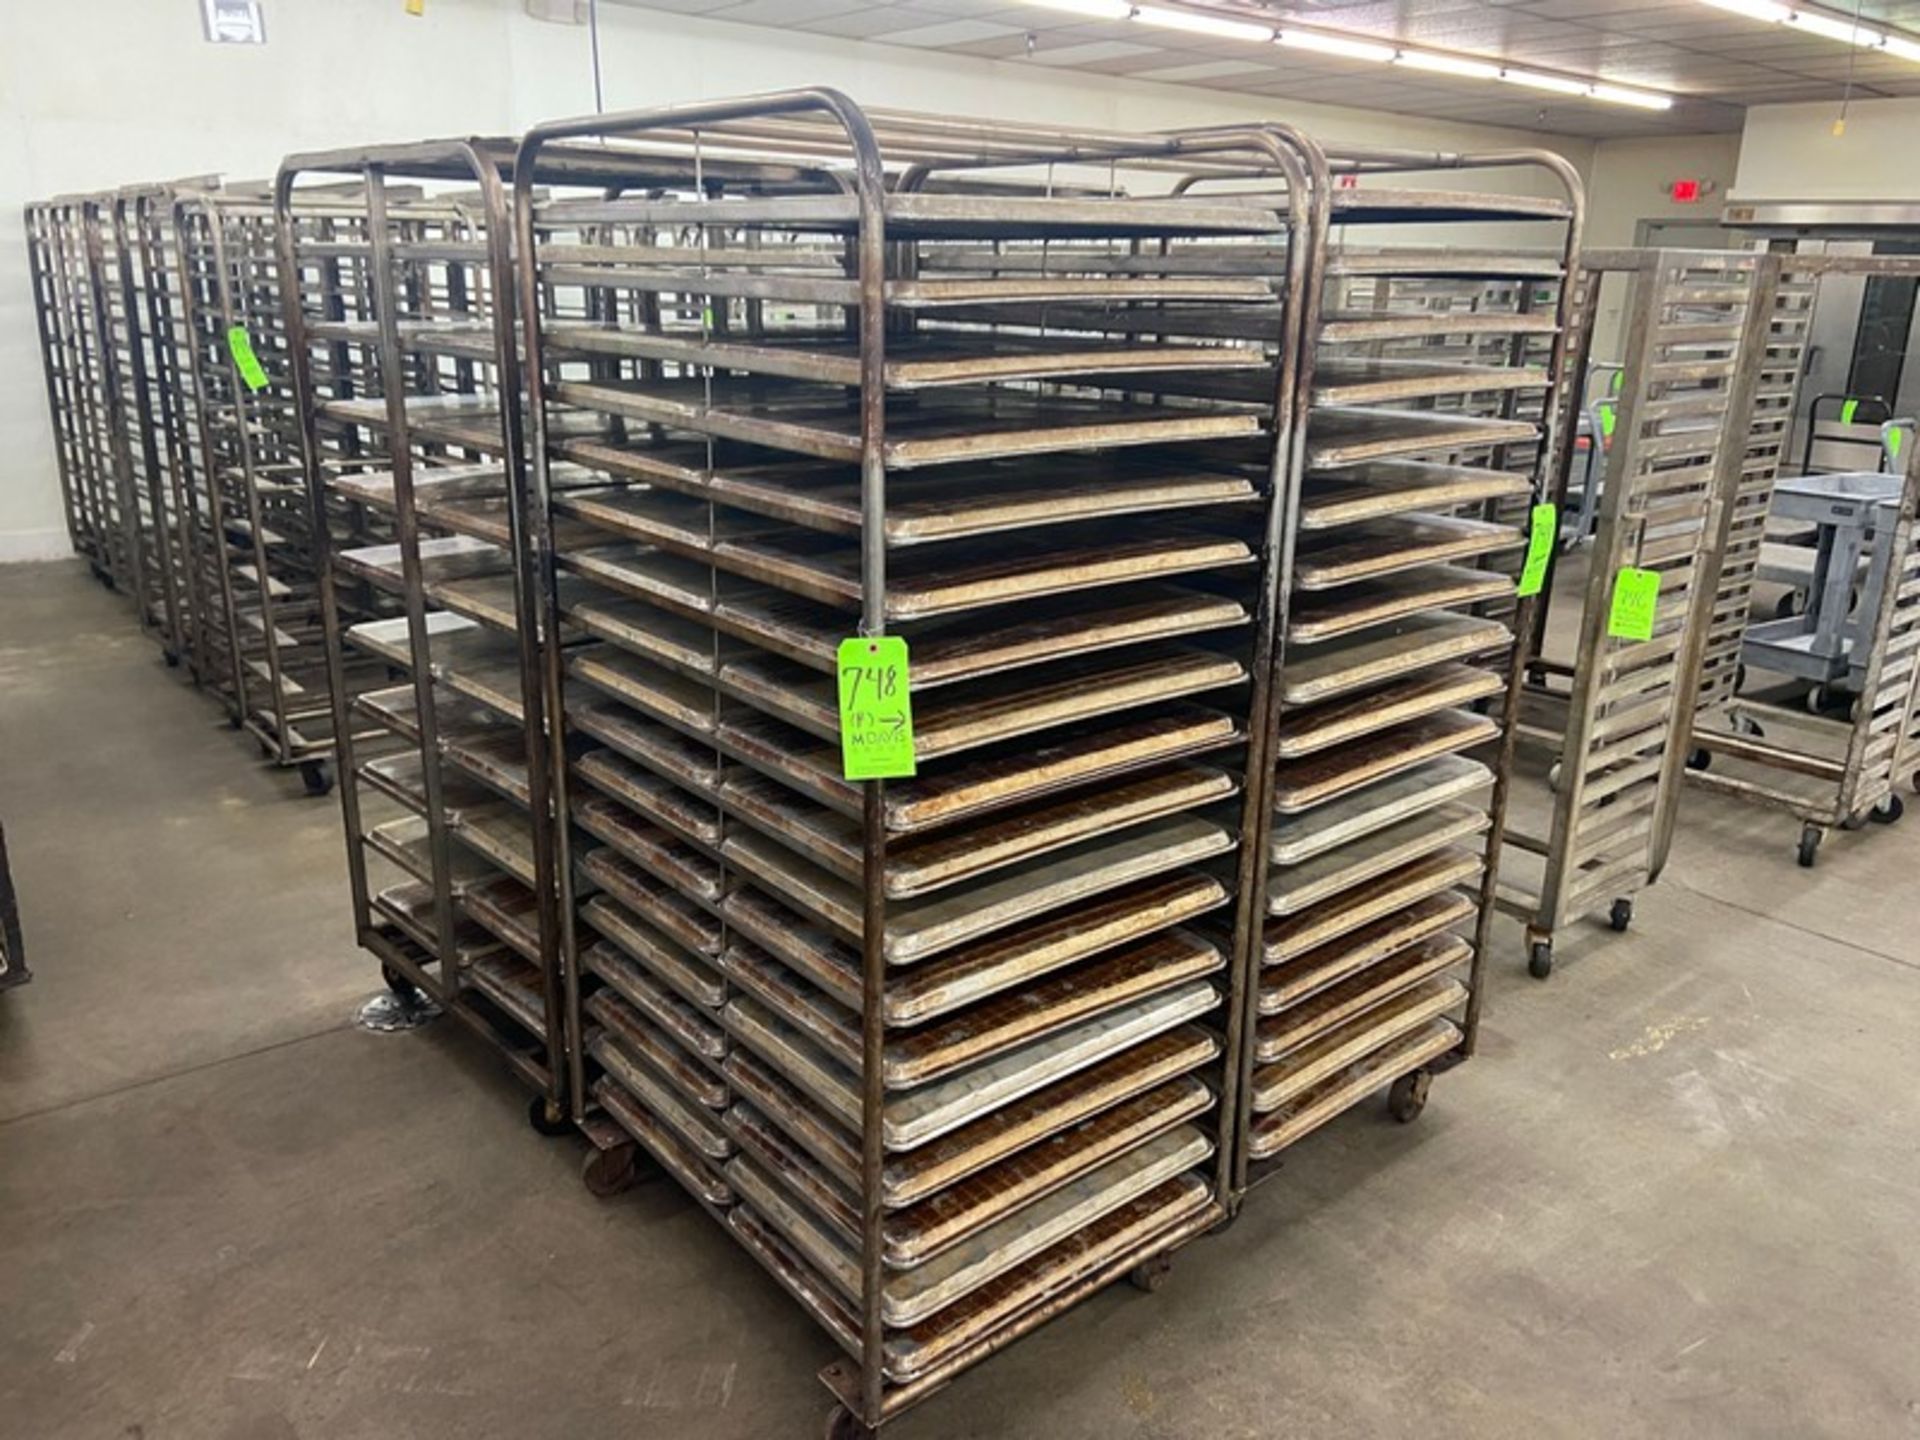 (4) PORTABLE DOUBLE SIDED BAKING PAN RACKS, MOUNTED ON CASTERS (LOCATED IN HERMITAGE, PA) - Image 2 of 3